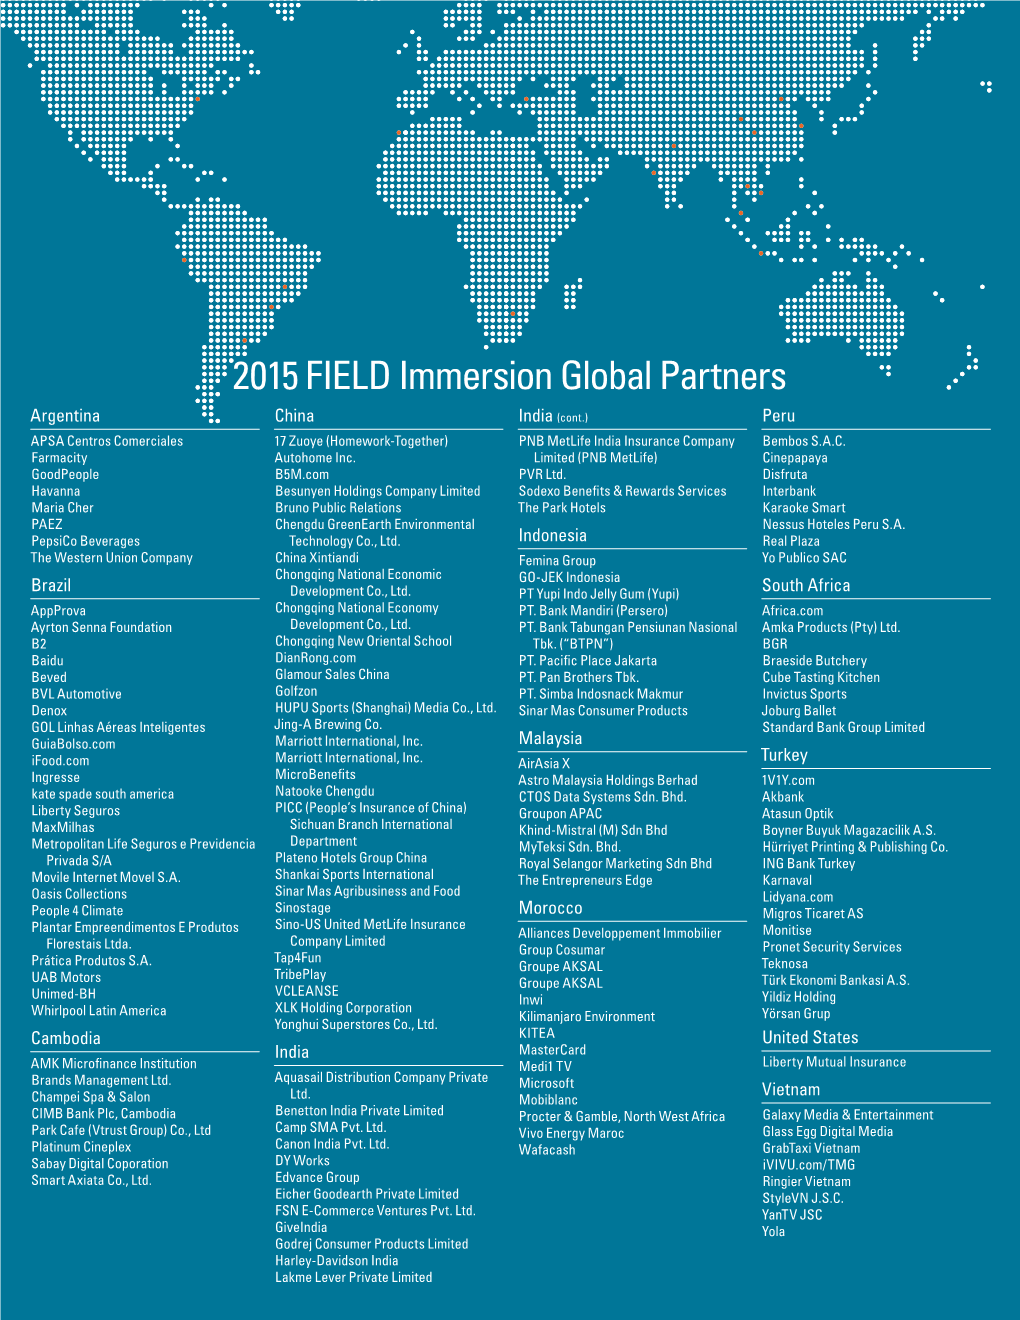 2015 FIELD Immersion Global Partners